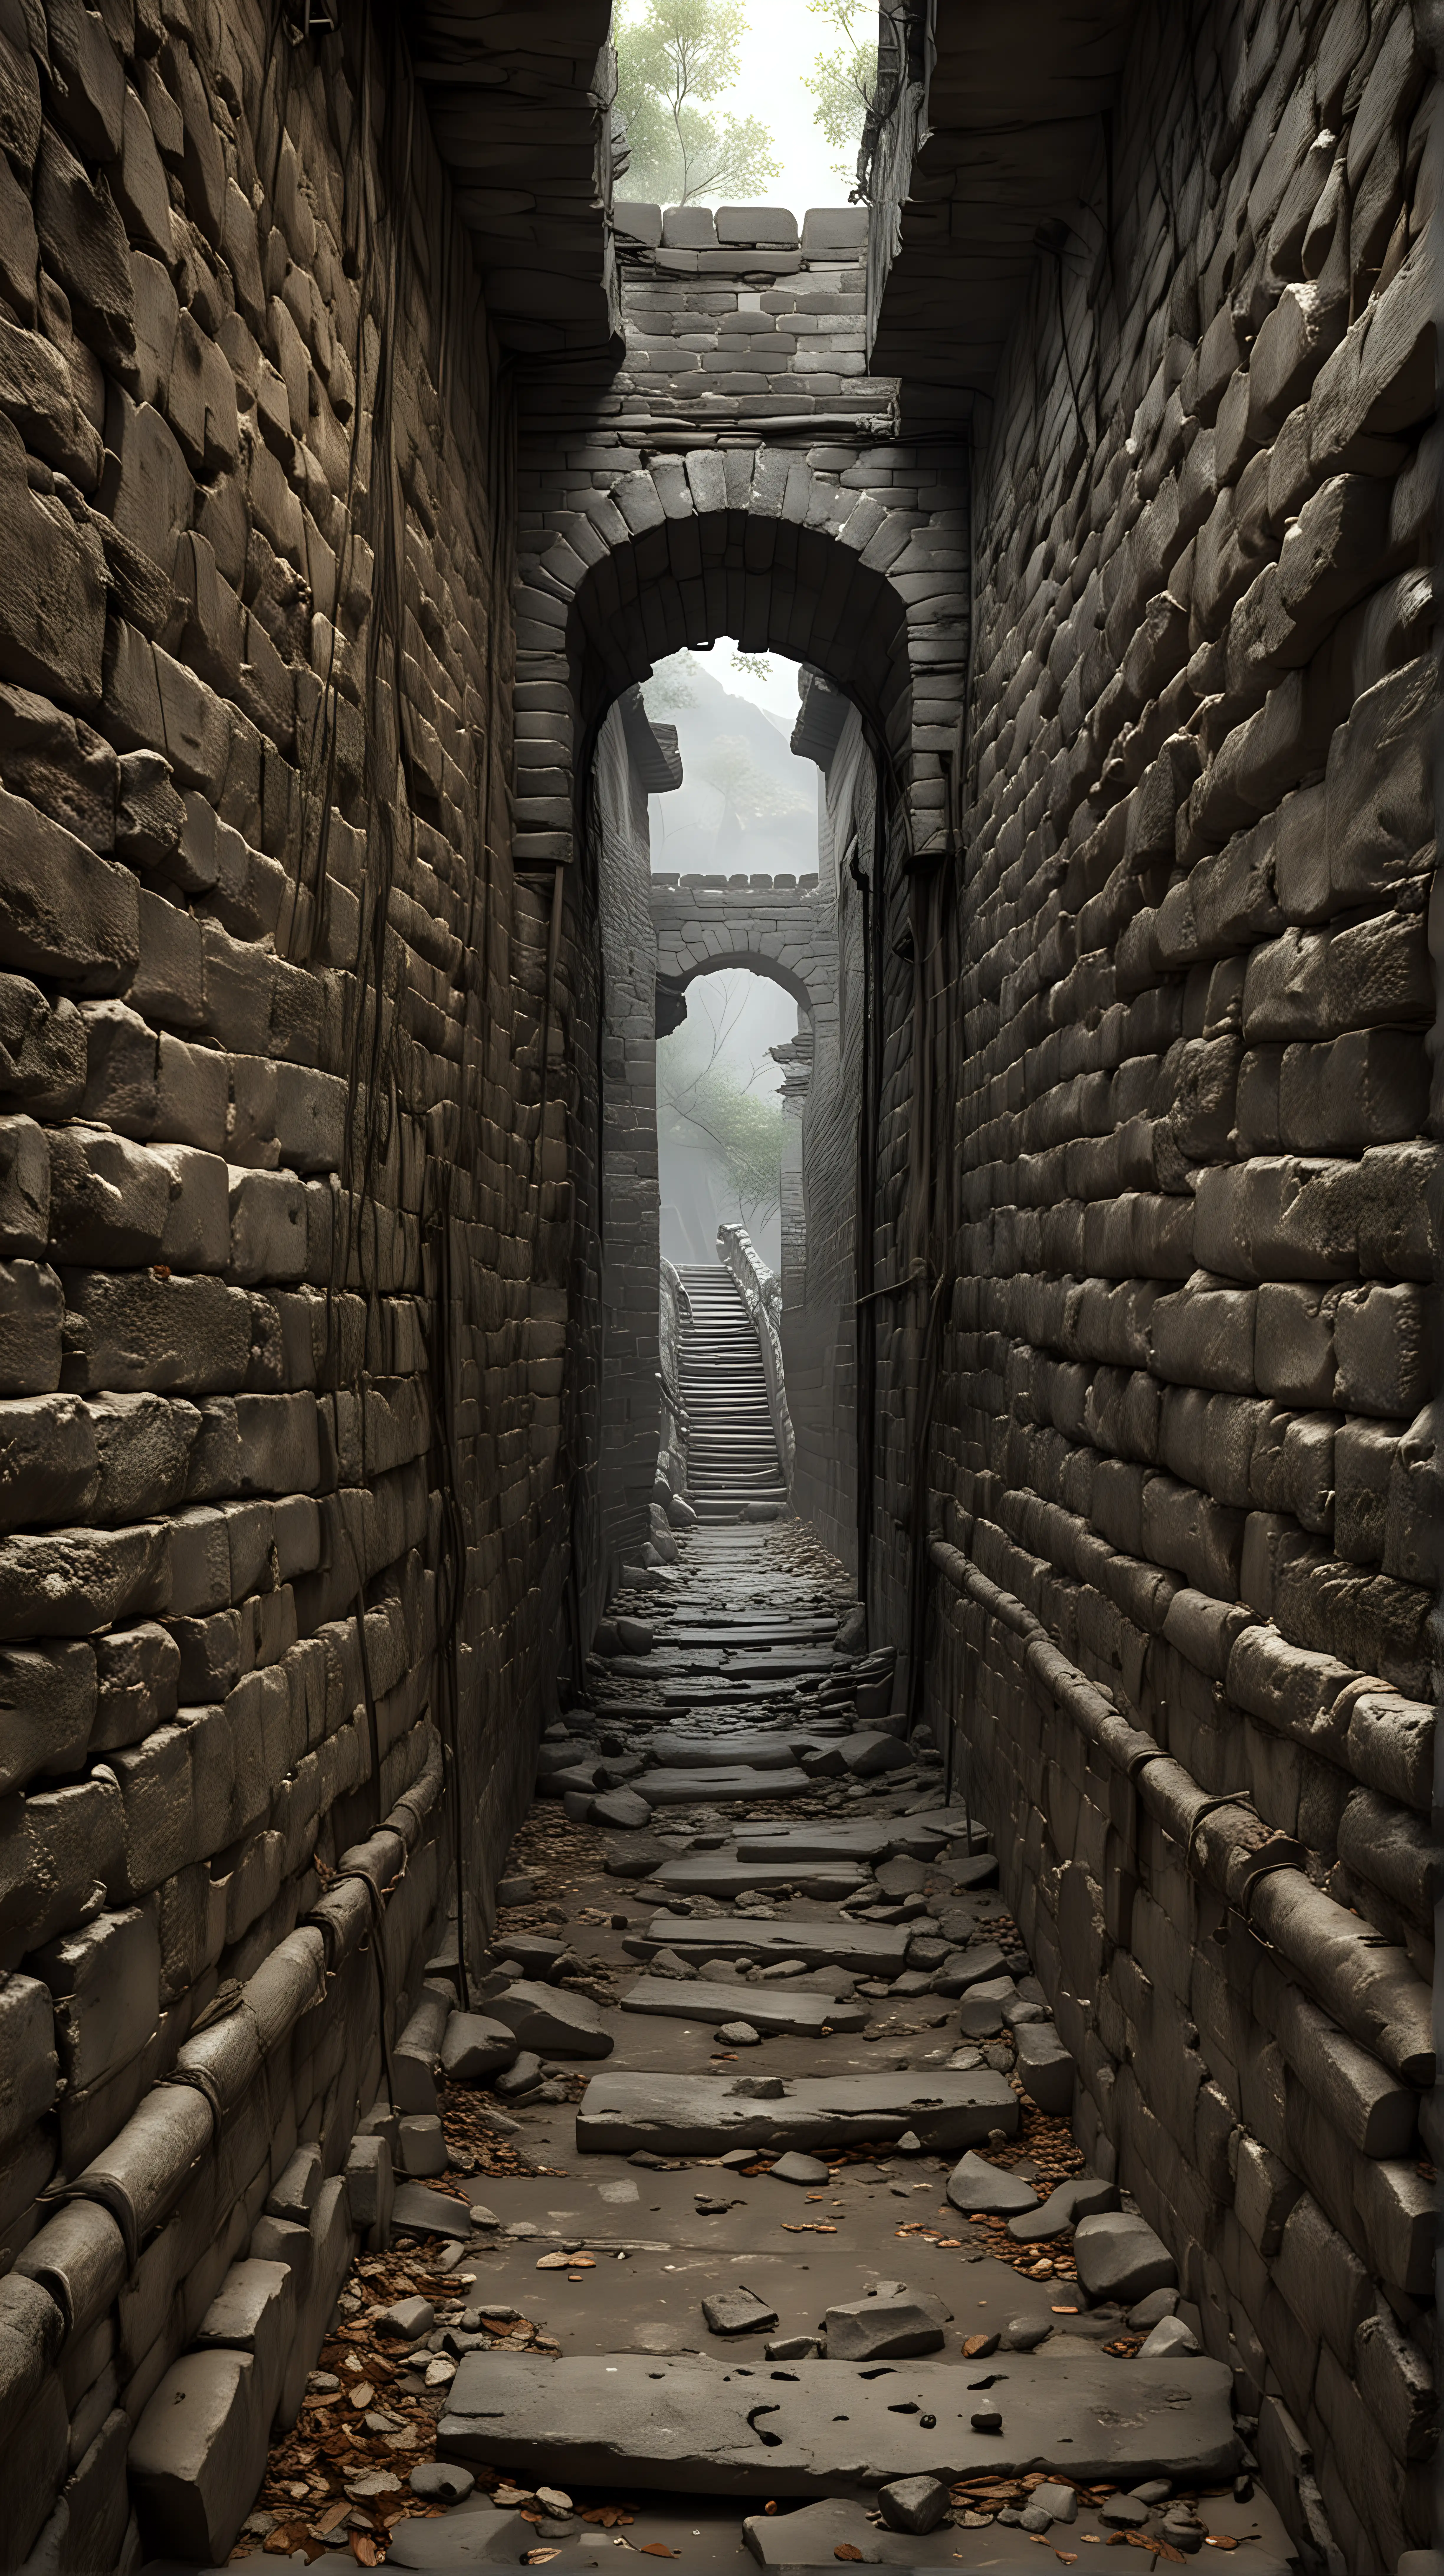 Hidden underground passages and traps: Throughout the many kilometers of the Great Wall of China, underground passages were created, which were used for the movement of troops and as a means of defense. Various traps and shelters were also built to protect against enemy attacks. Hyper realistic